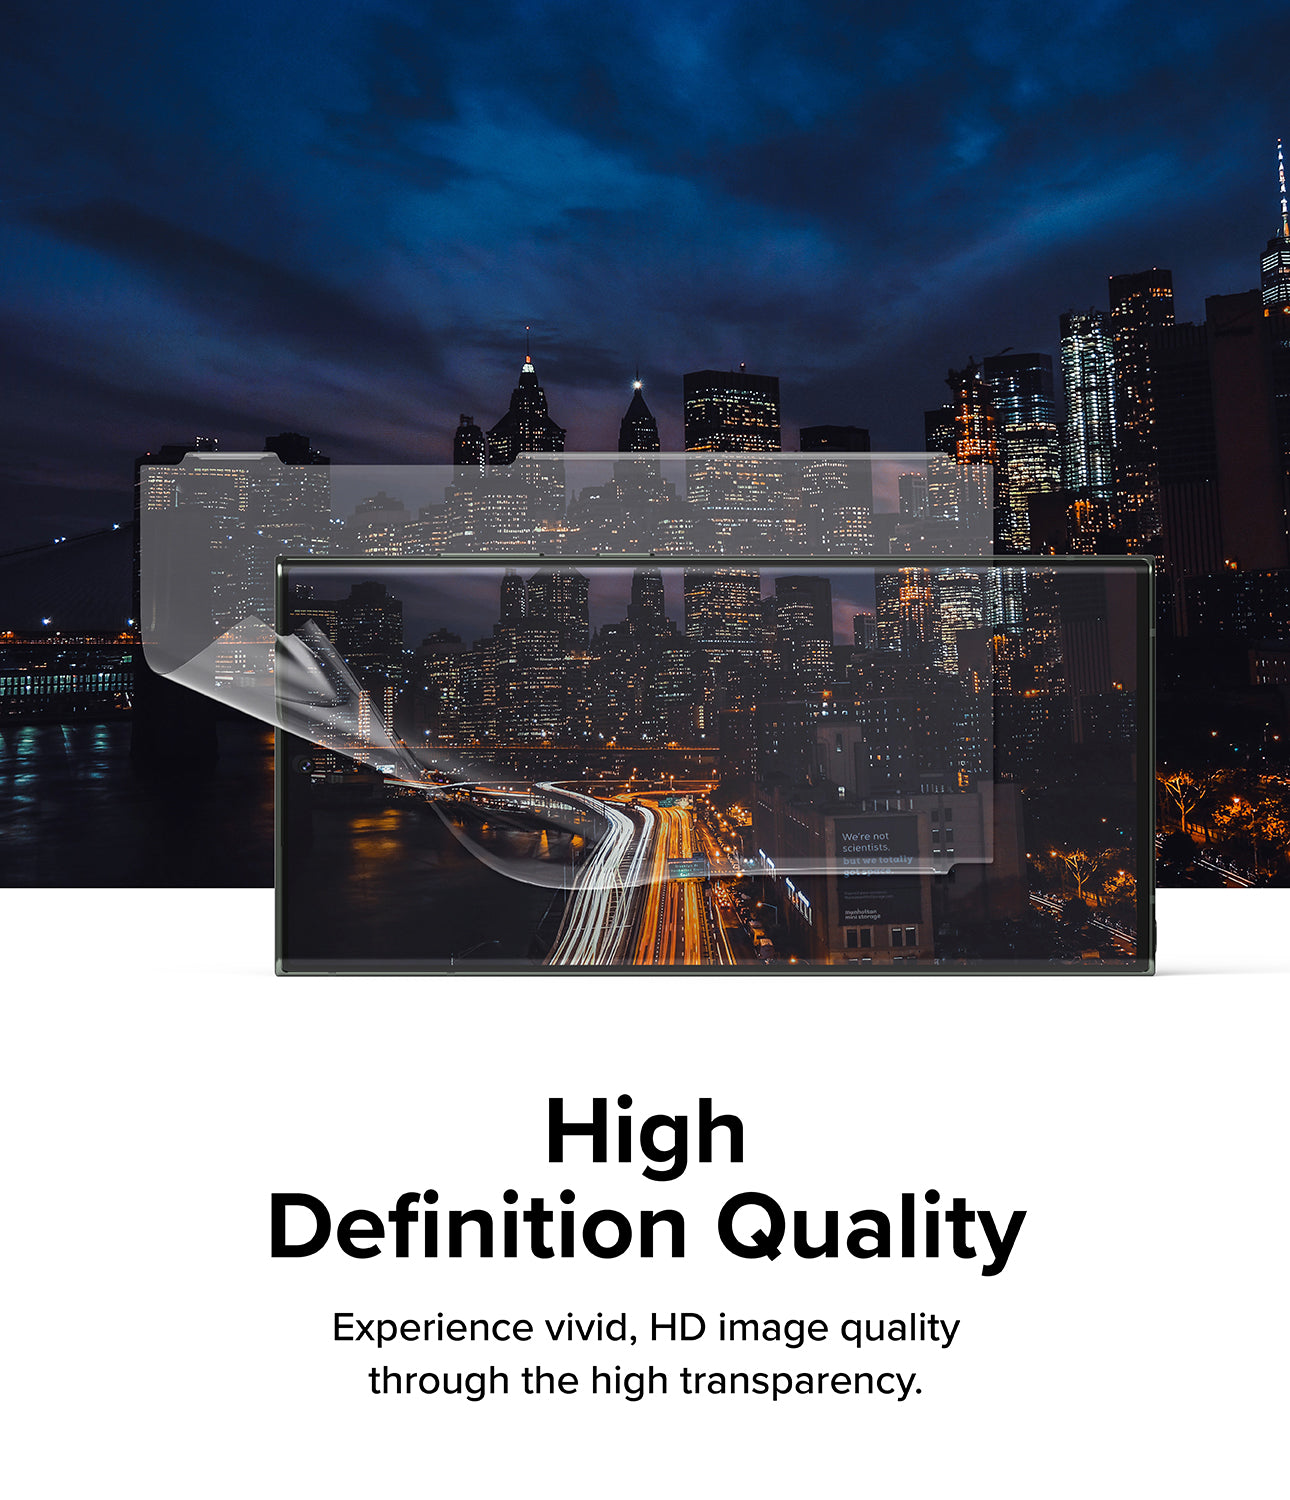 High Definition Quality l Experience vivid, HD image quality through the high transparency.